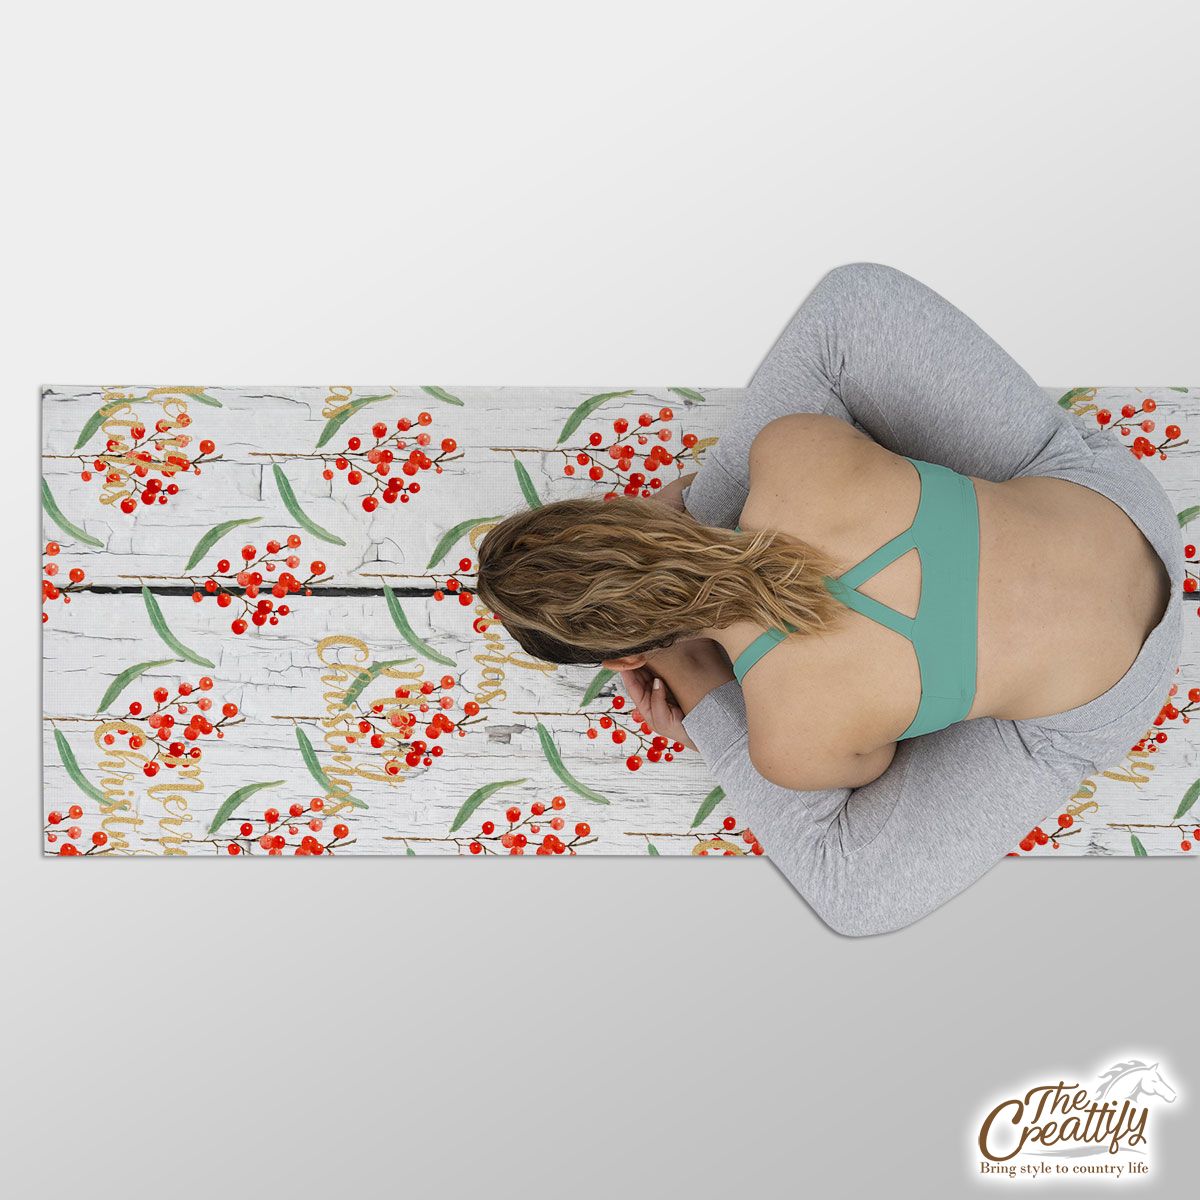 Red Berries With Merry Christmas Wishes Yoga Mat